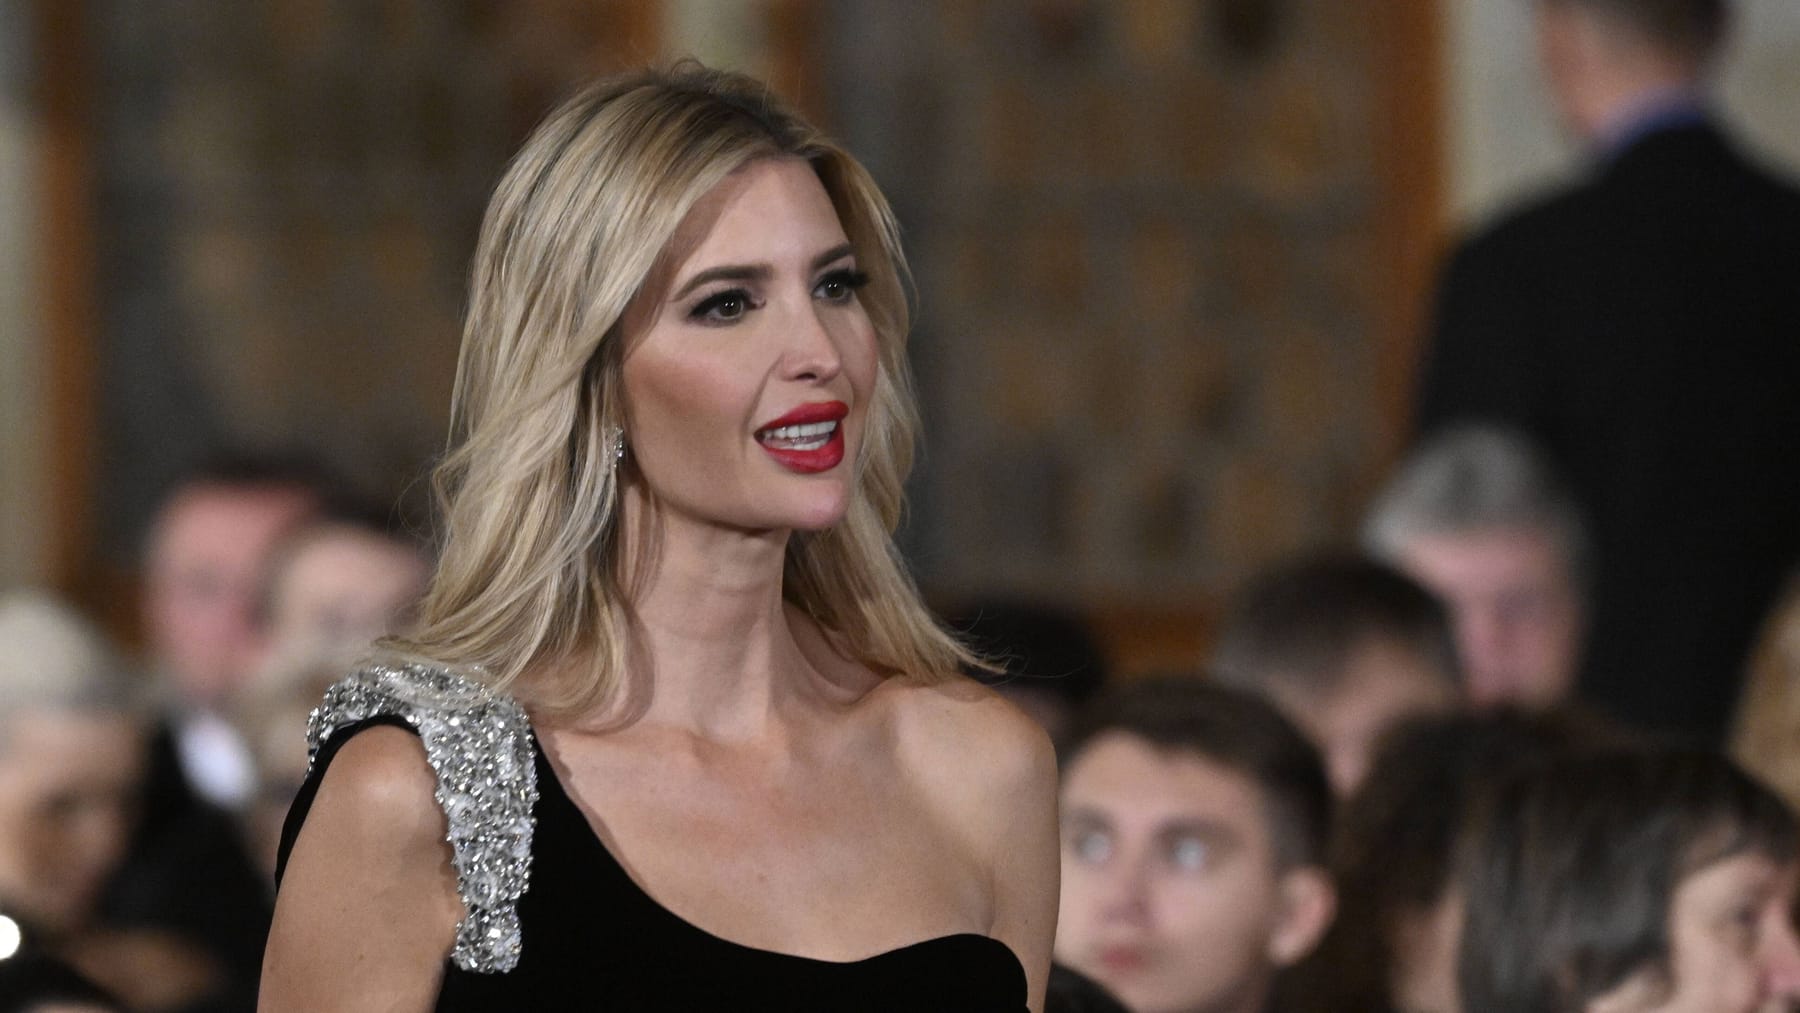 Why is Ivanka Trump resisting her father’s plans?